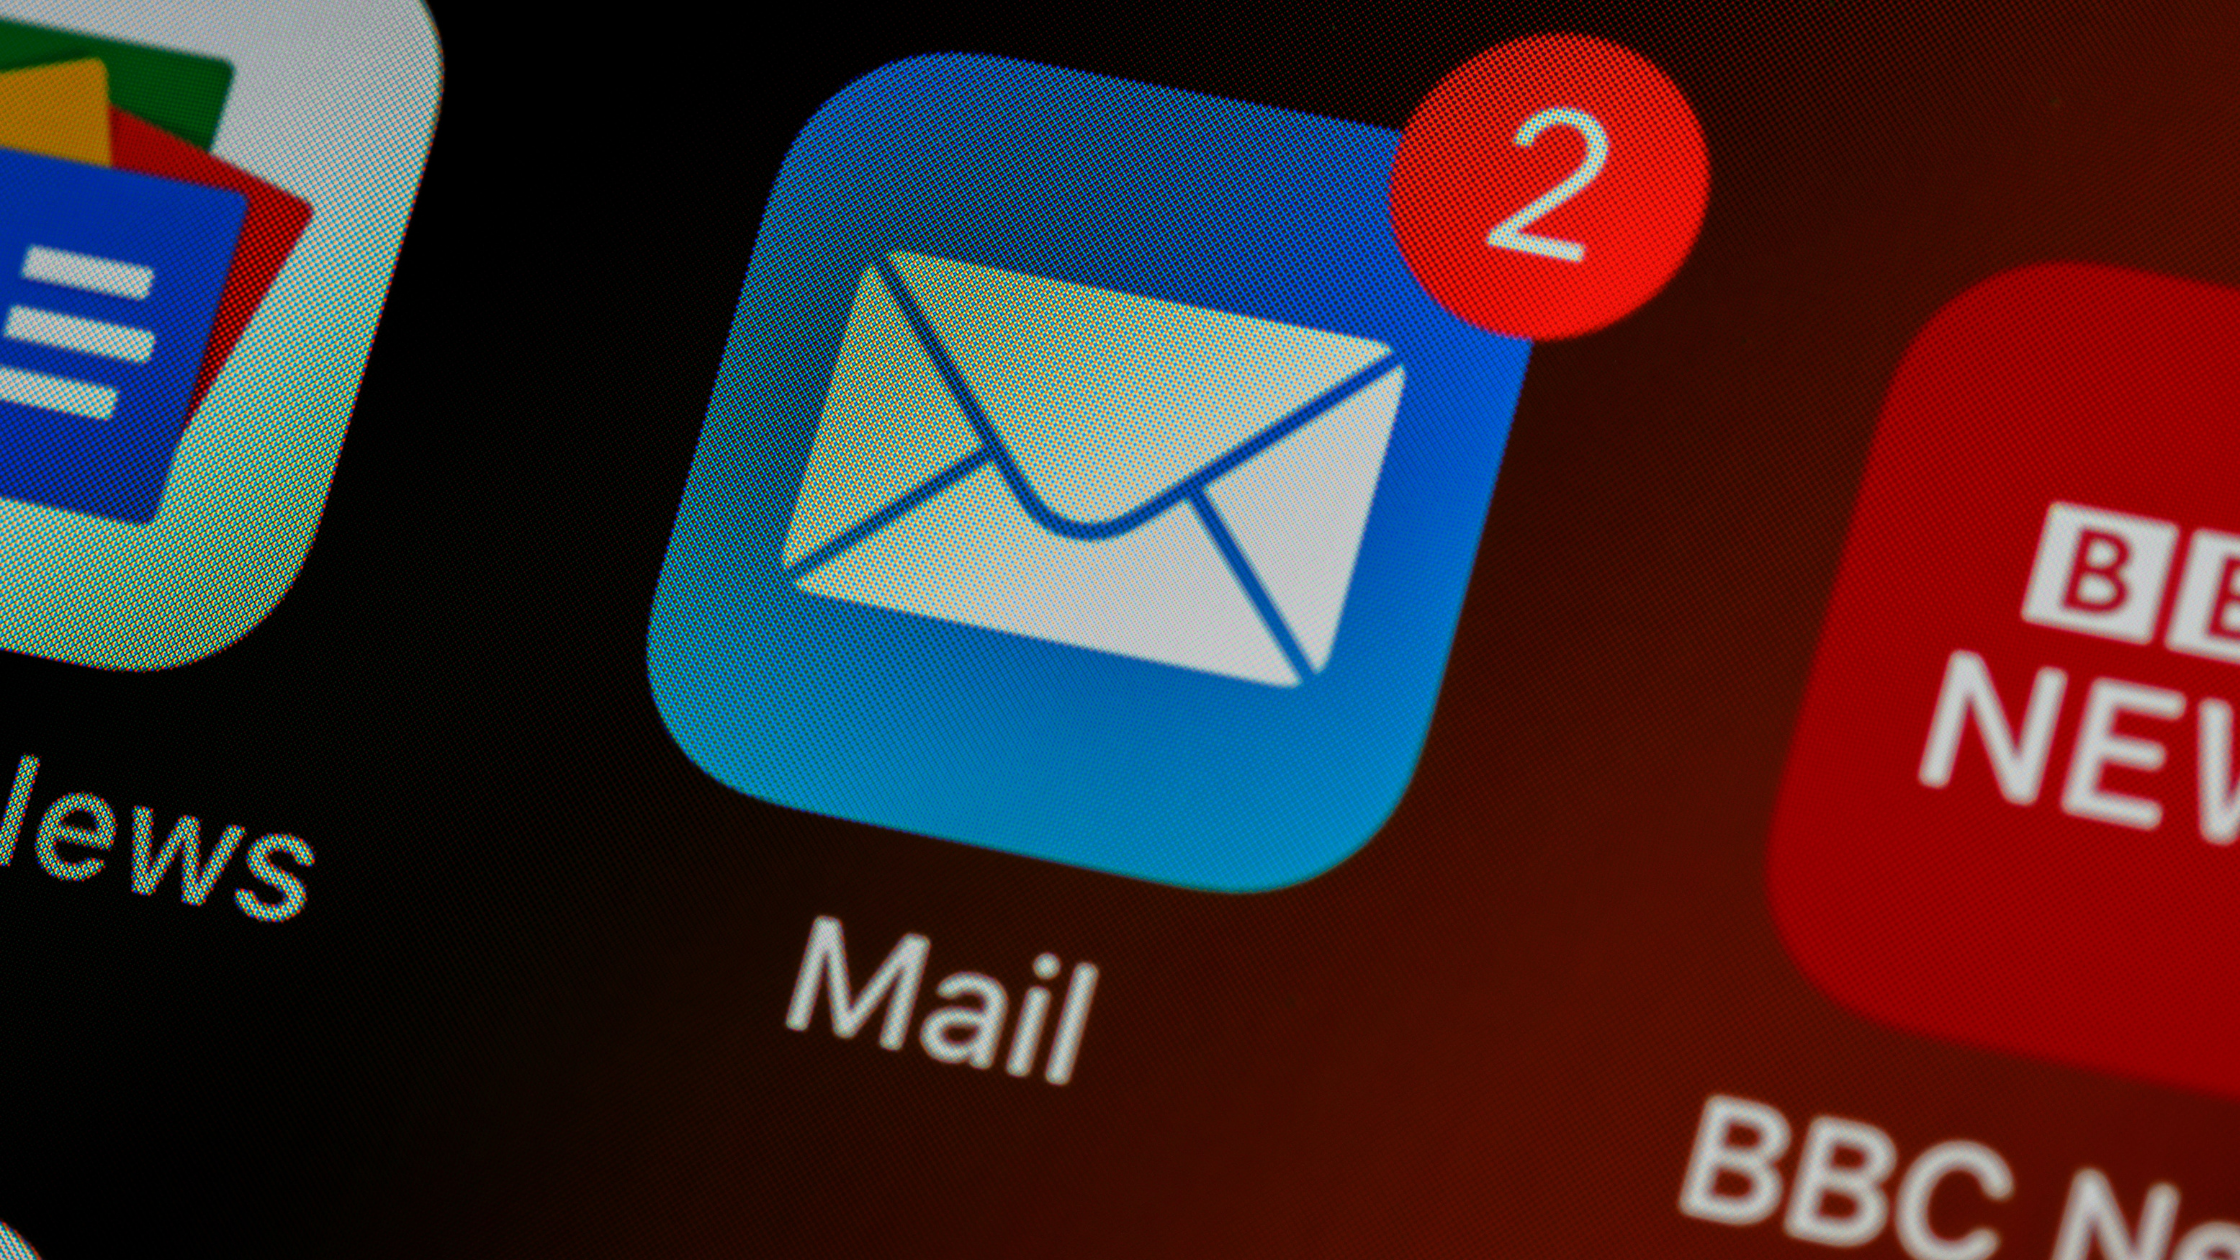 The mail app icon on a smartphone with a red number 2 notification